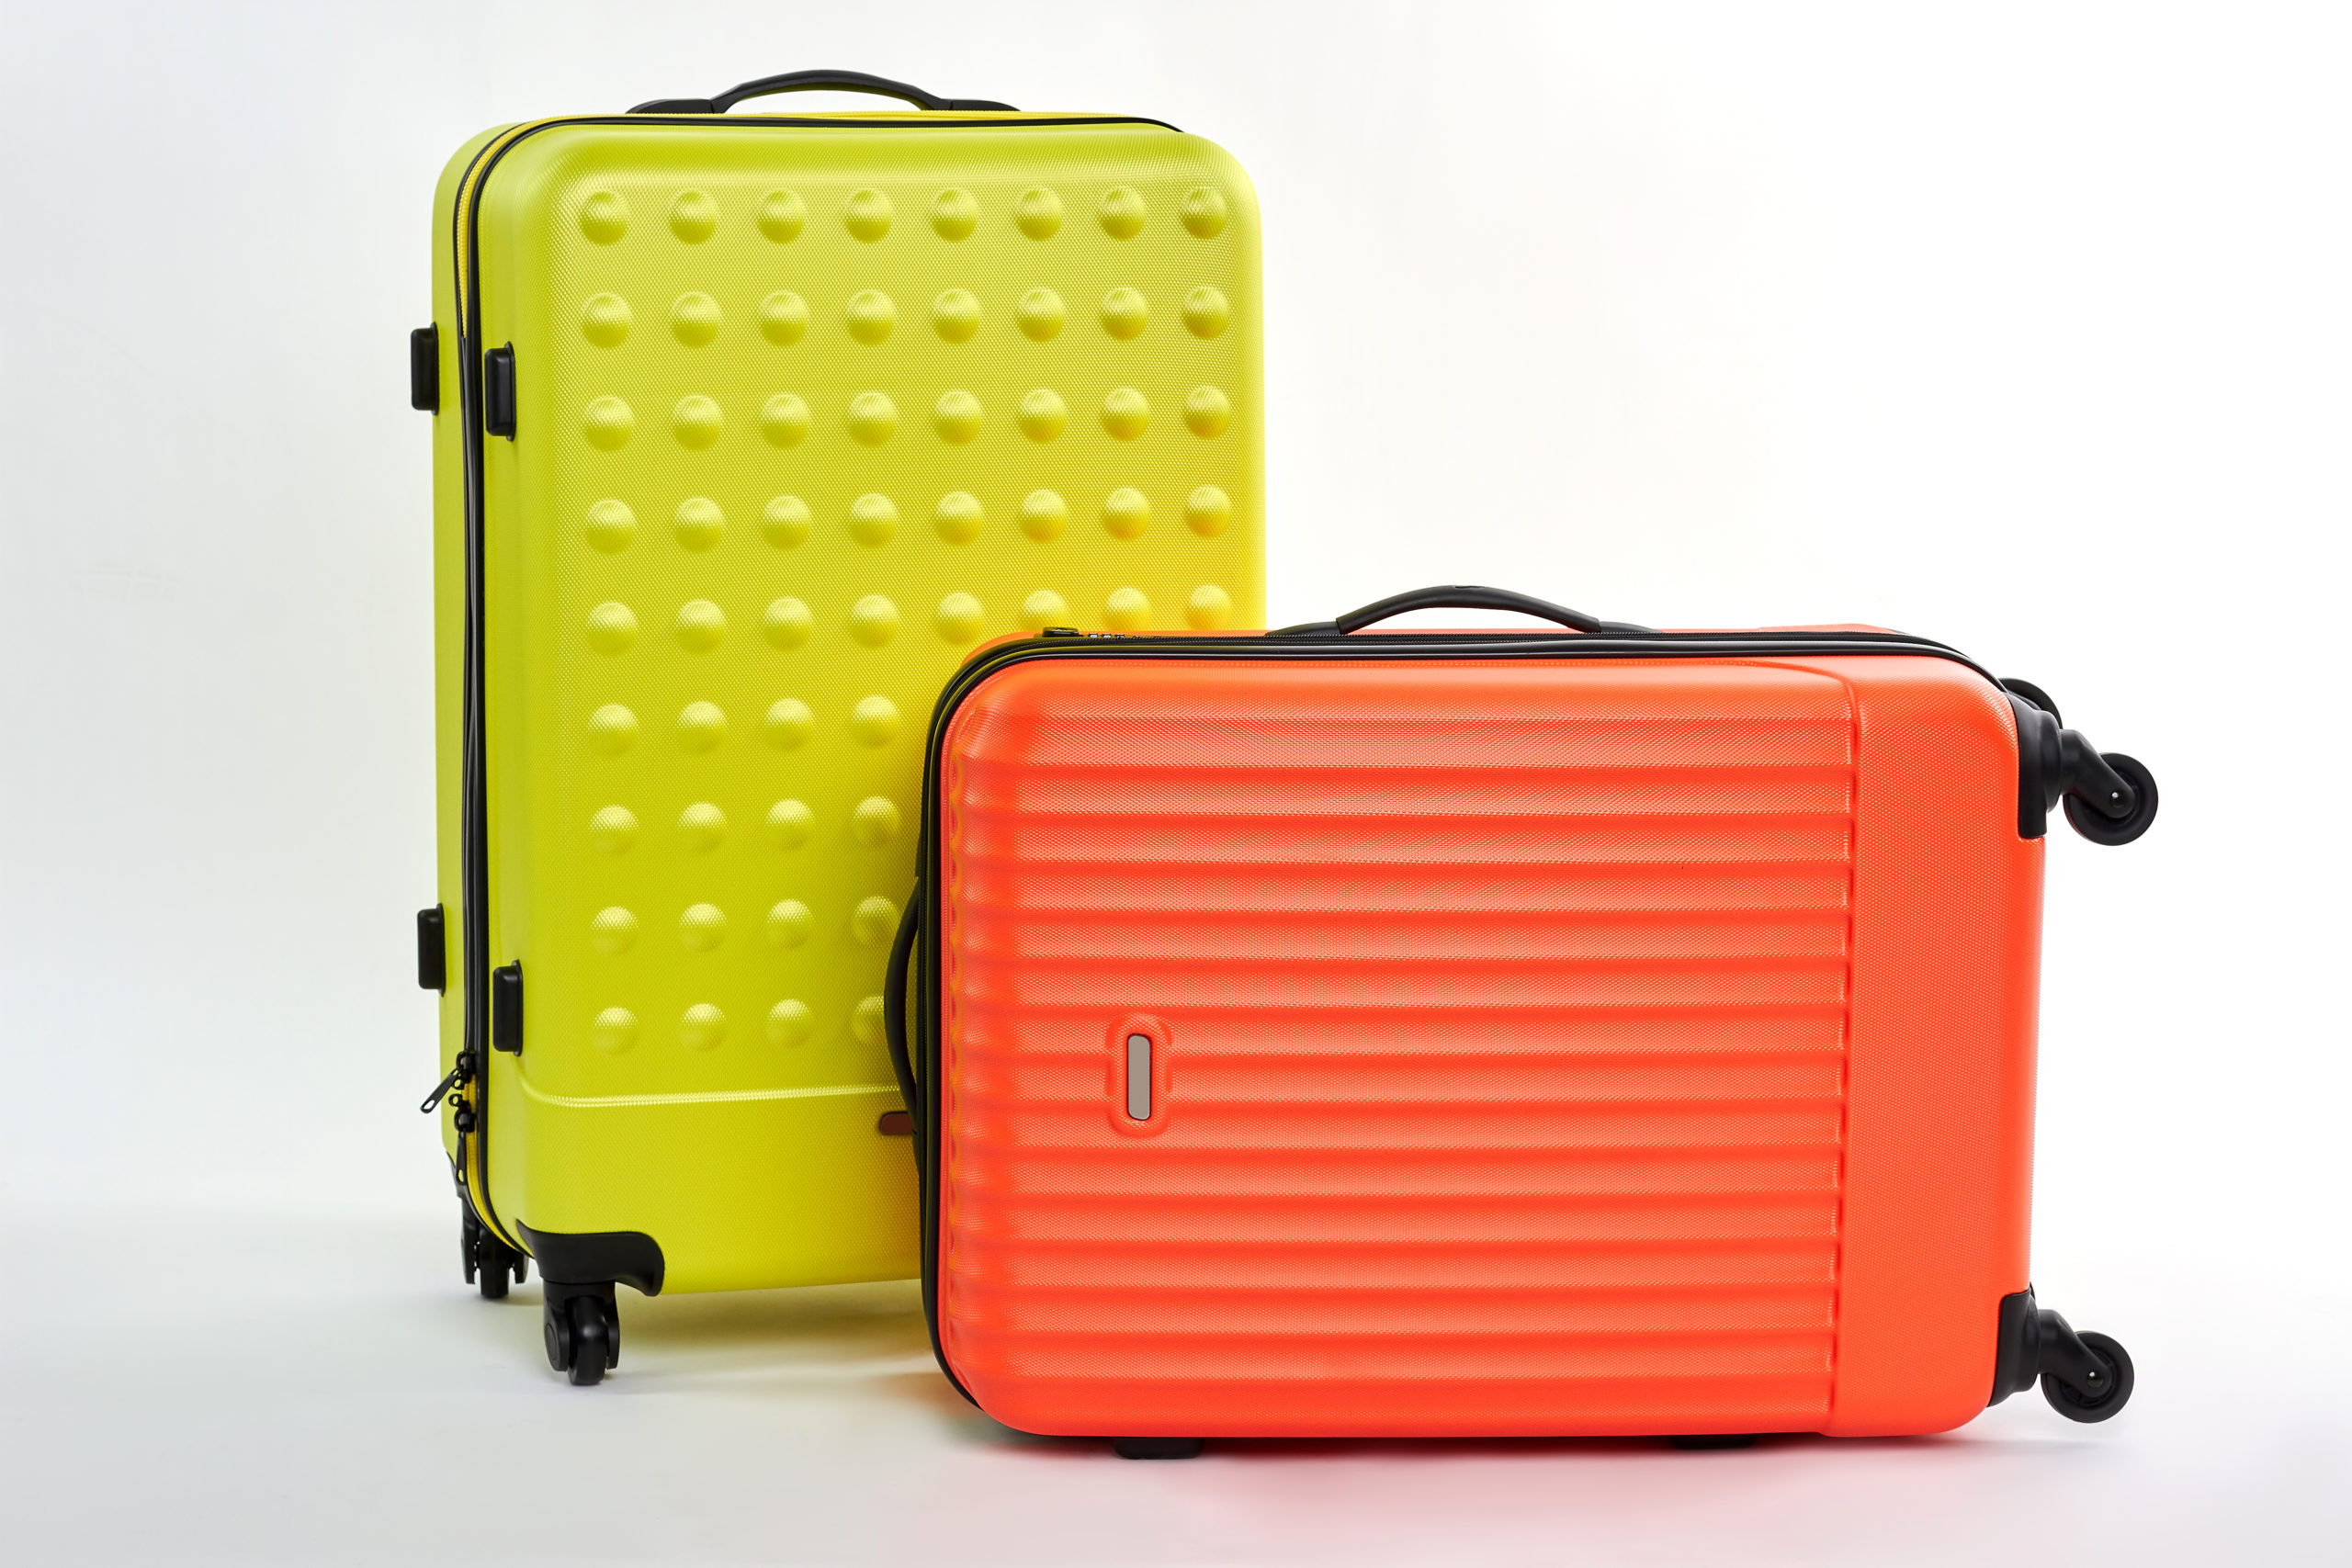 pair-of-colorful-suitcases-2021-08-31-23-43-04-utc-scaled